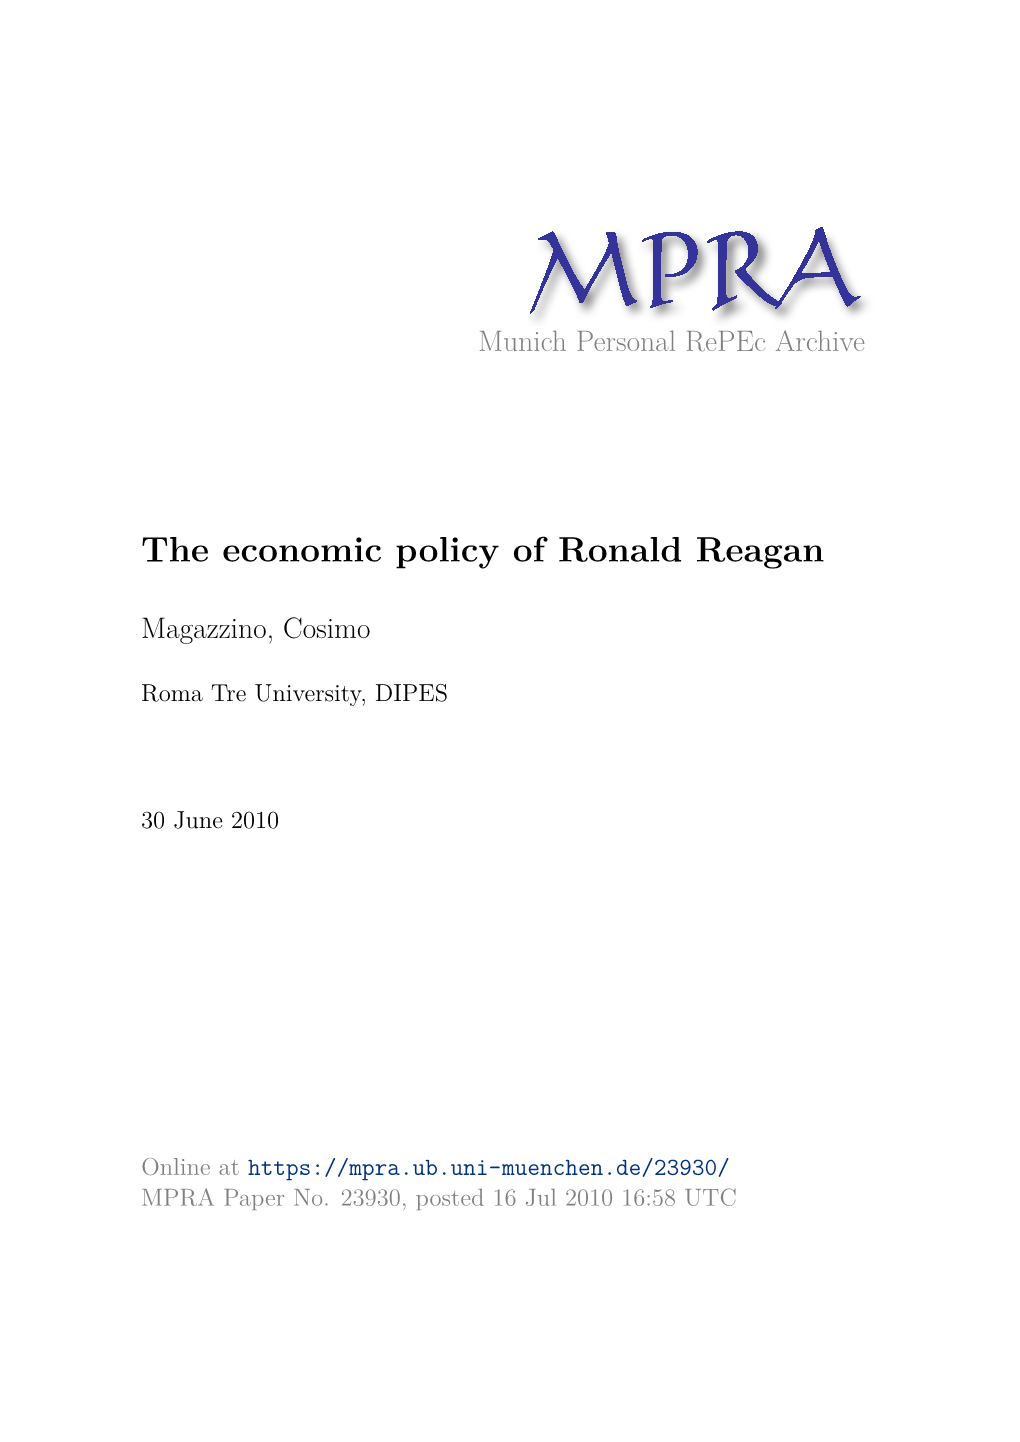 The Economic Policy of Ronald Reagan